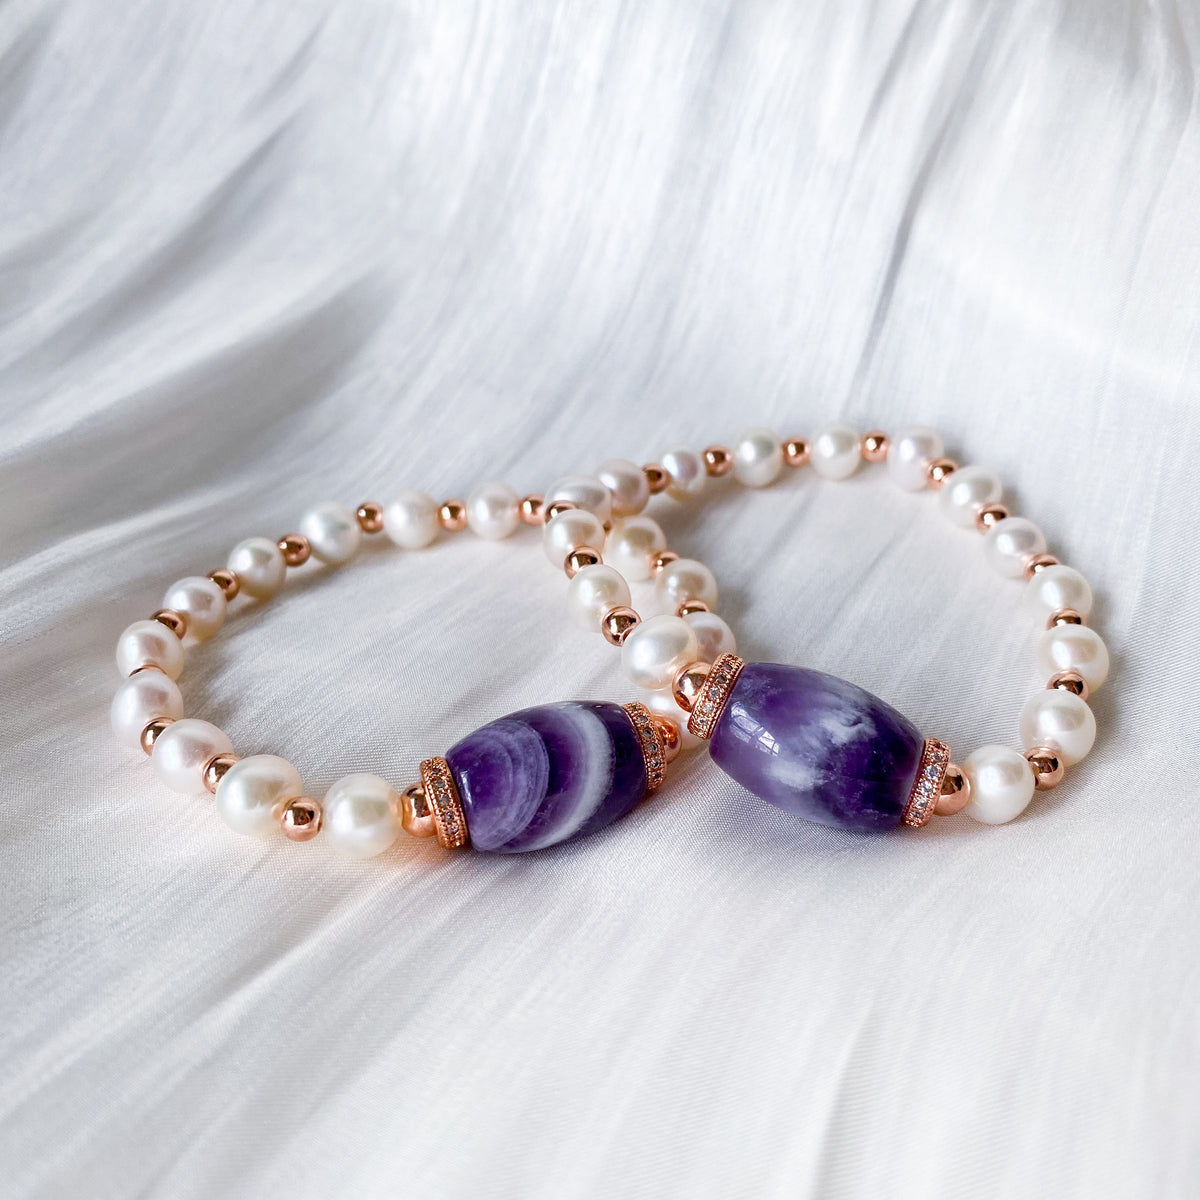 Bedazzled Chevron Amethyst with Freshwater Pearl Bracelet – New Age FSG